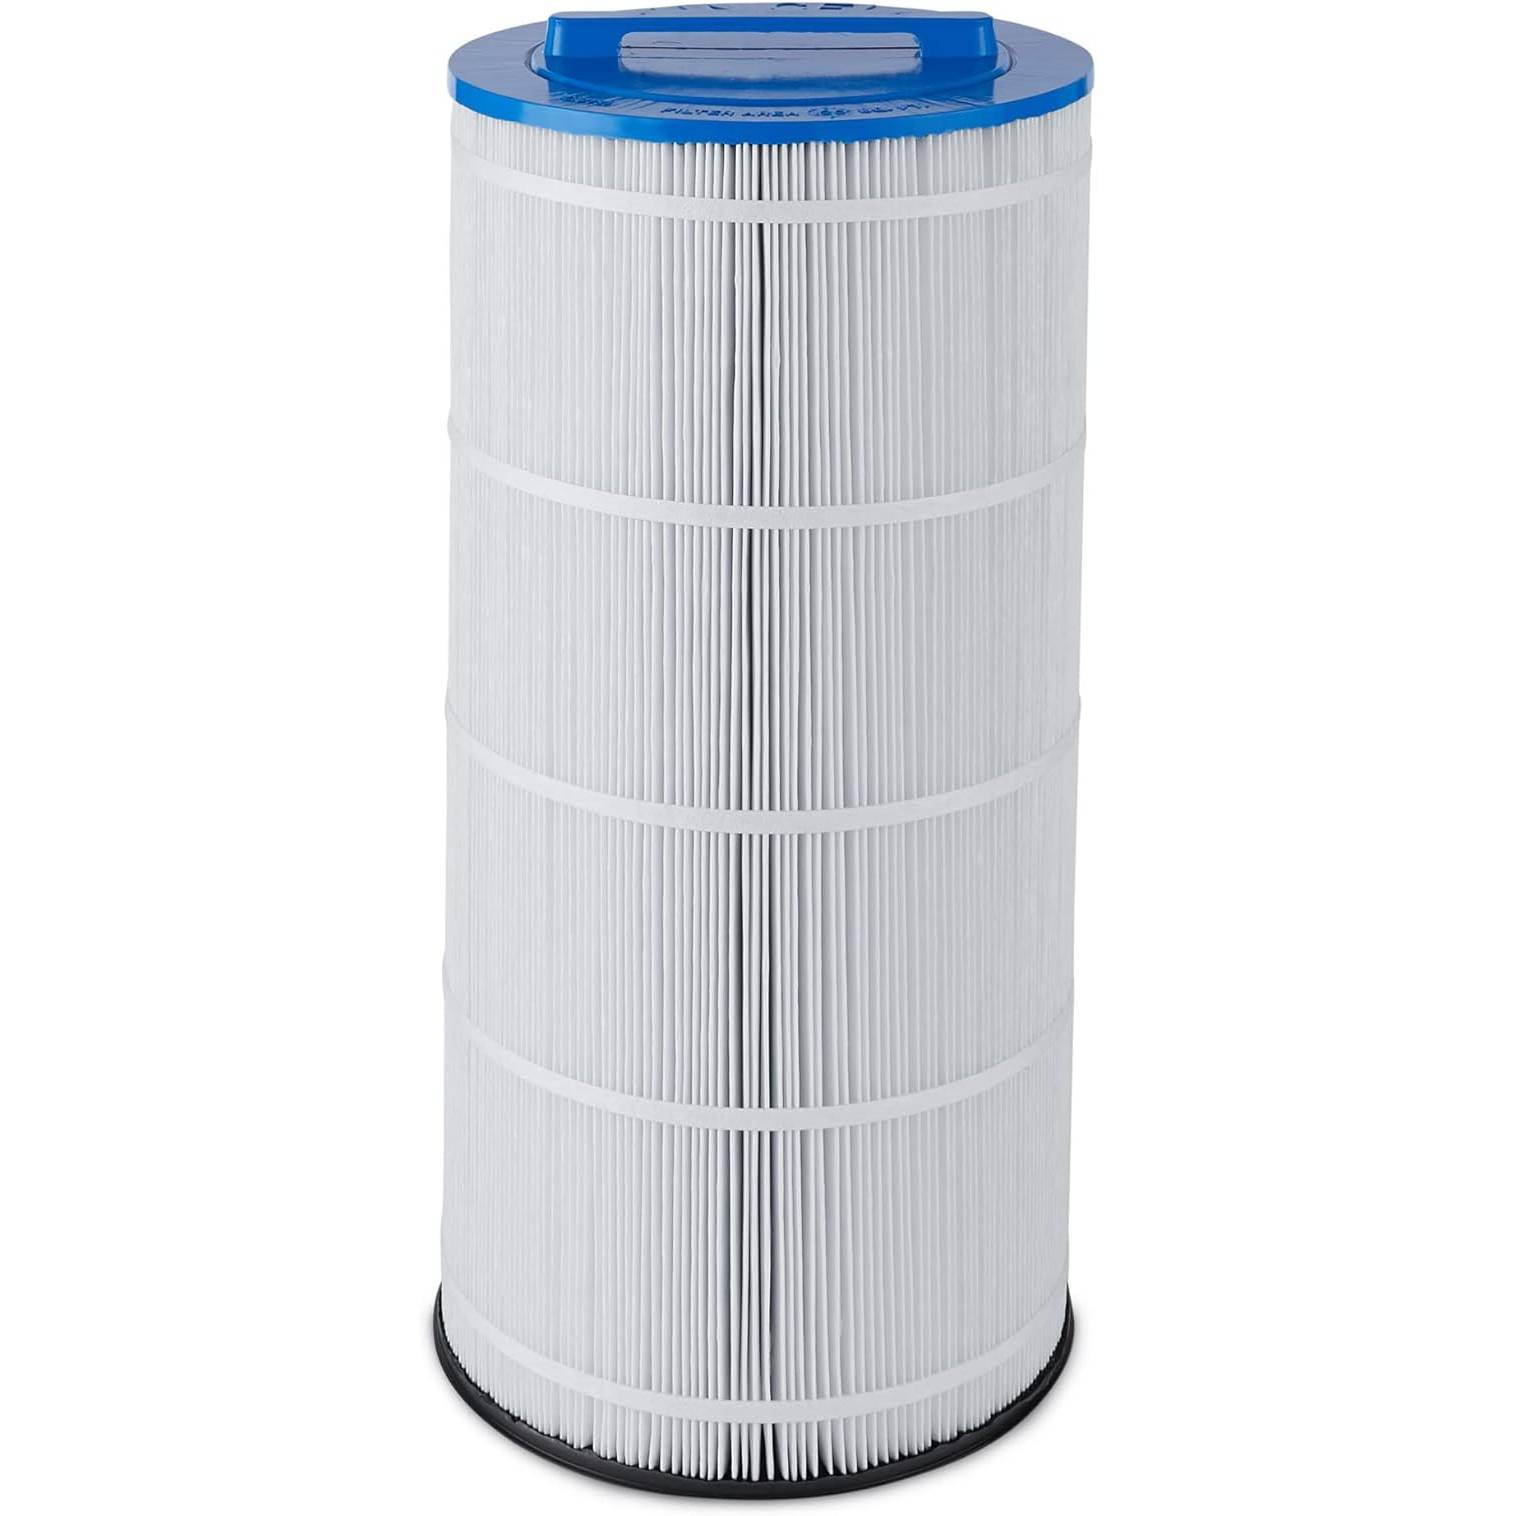 Filters Fast® FF-1401 Replacement Spa & Jacuzzi Filter Cartridge